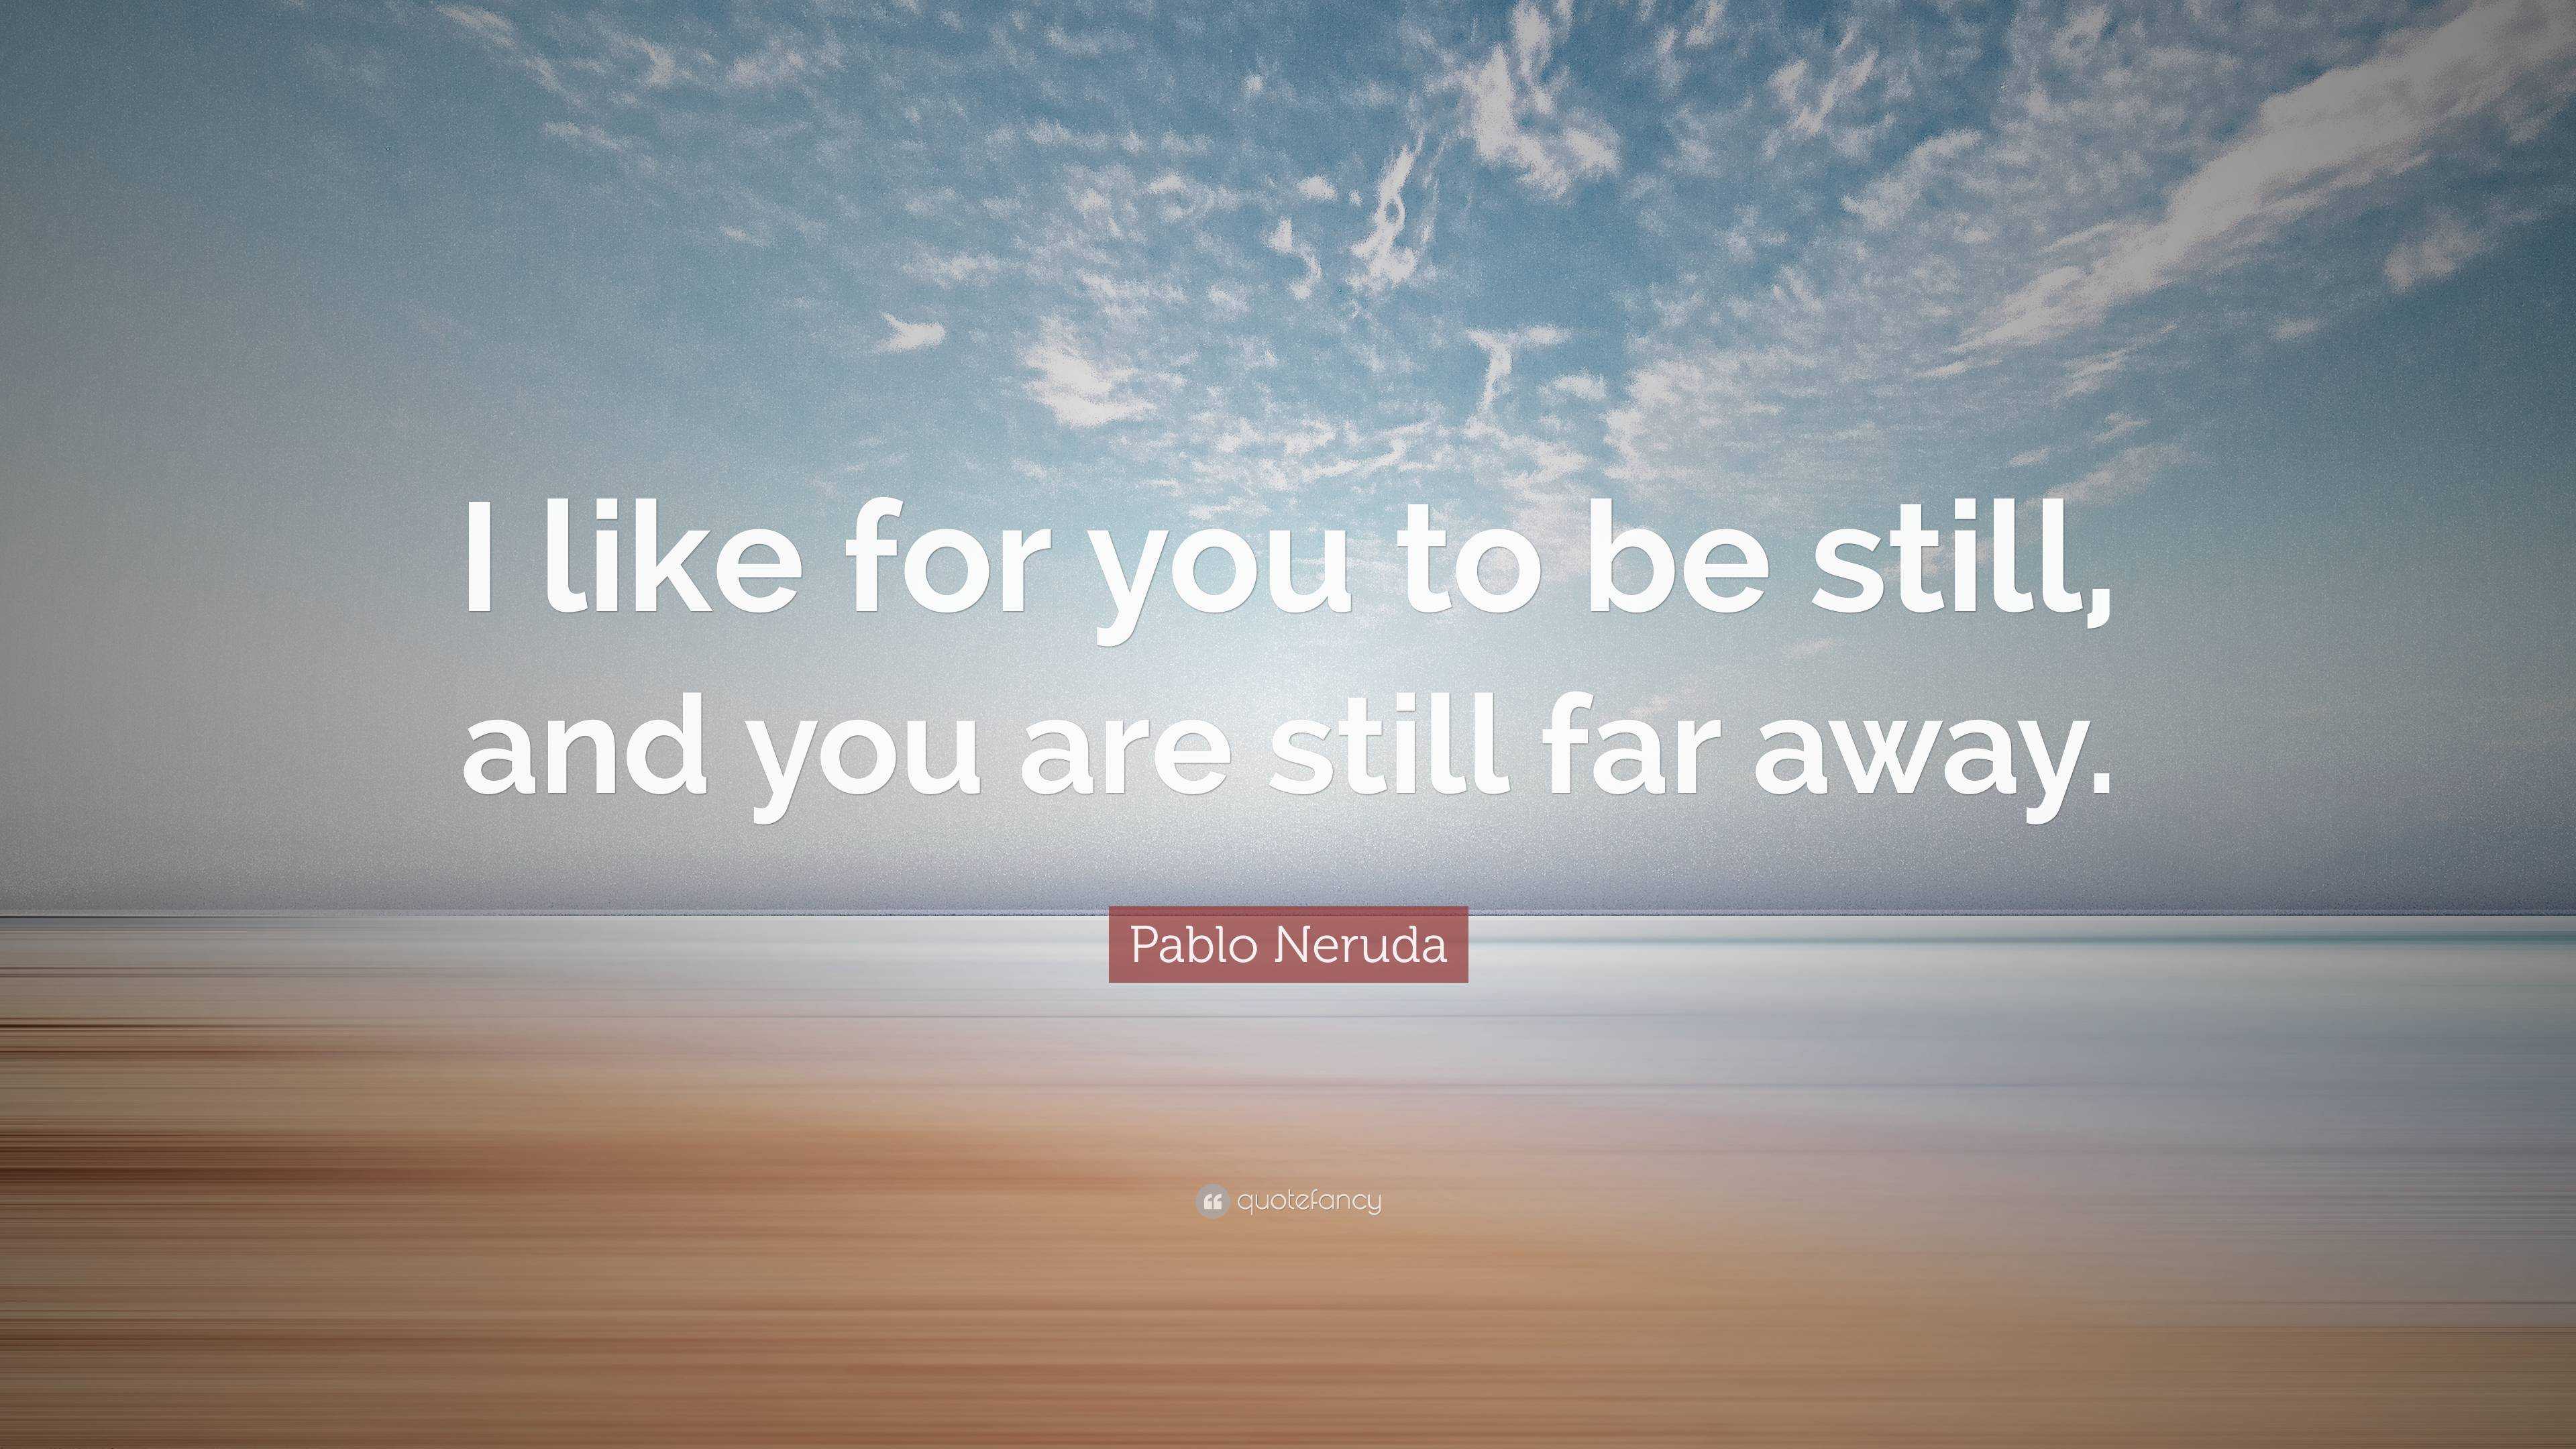 pablo neruda i like for you to be still